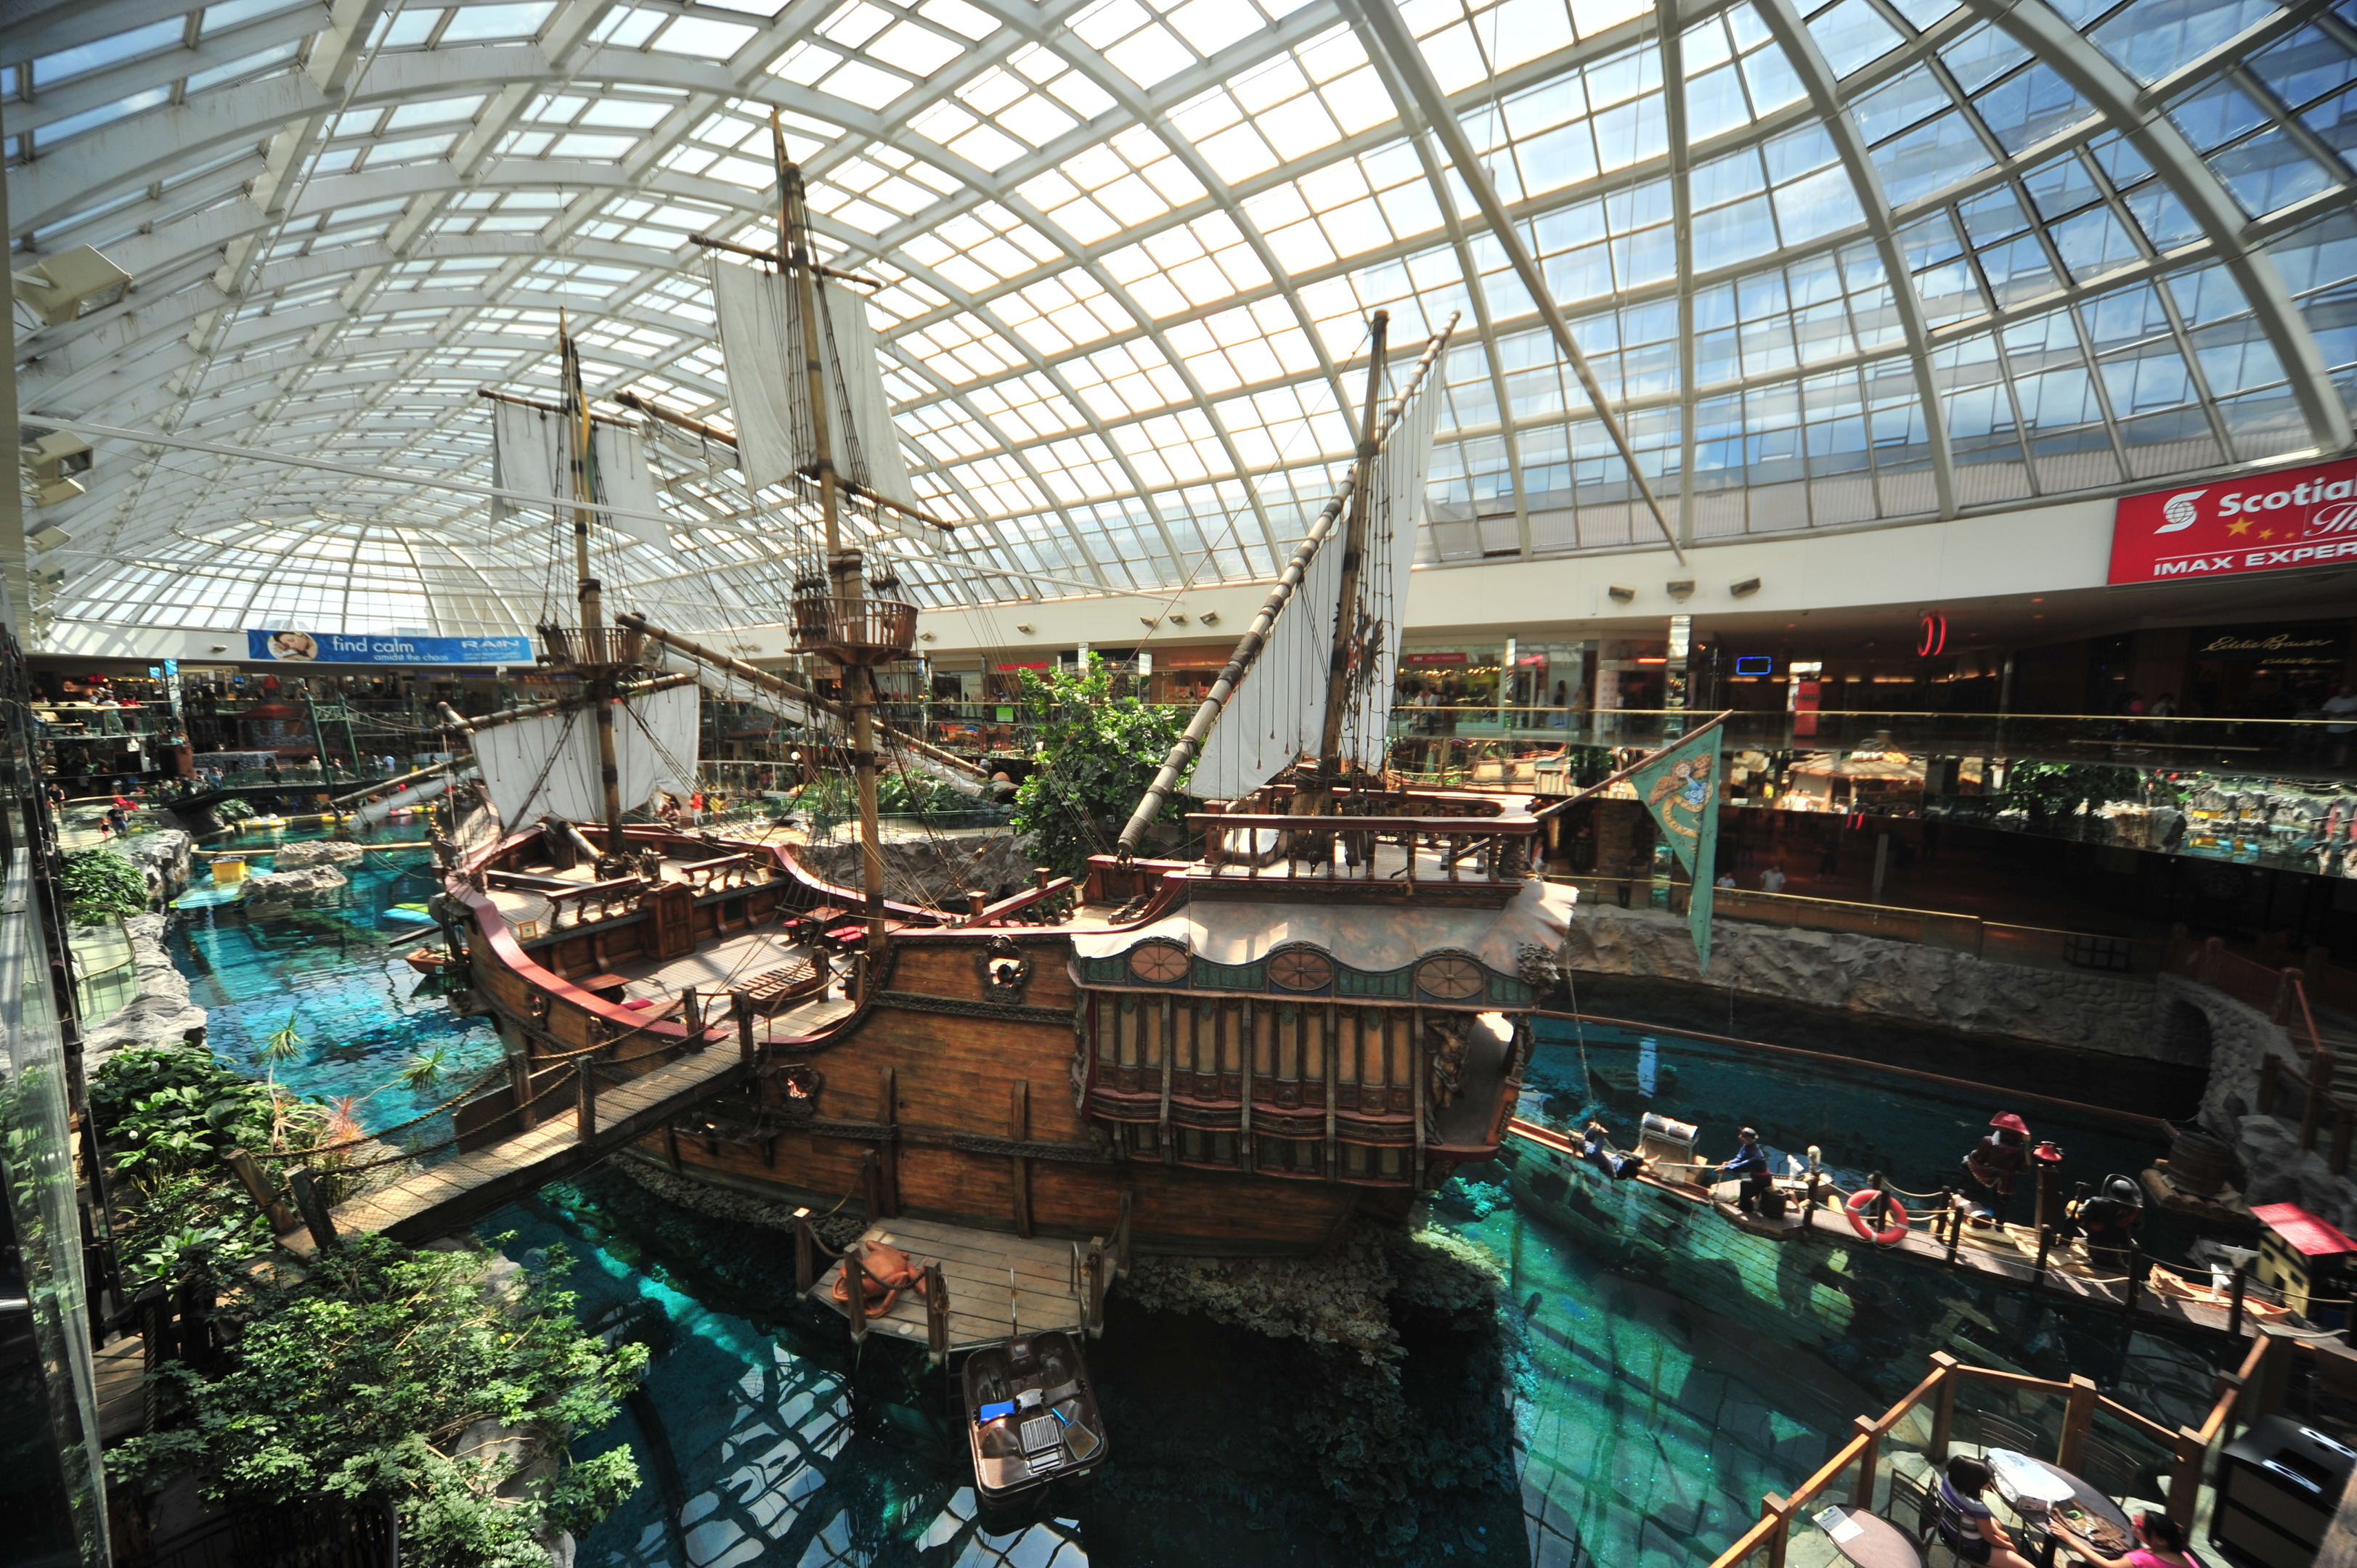 10 of the world's largest, most jaw-dropping shopping malls - The